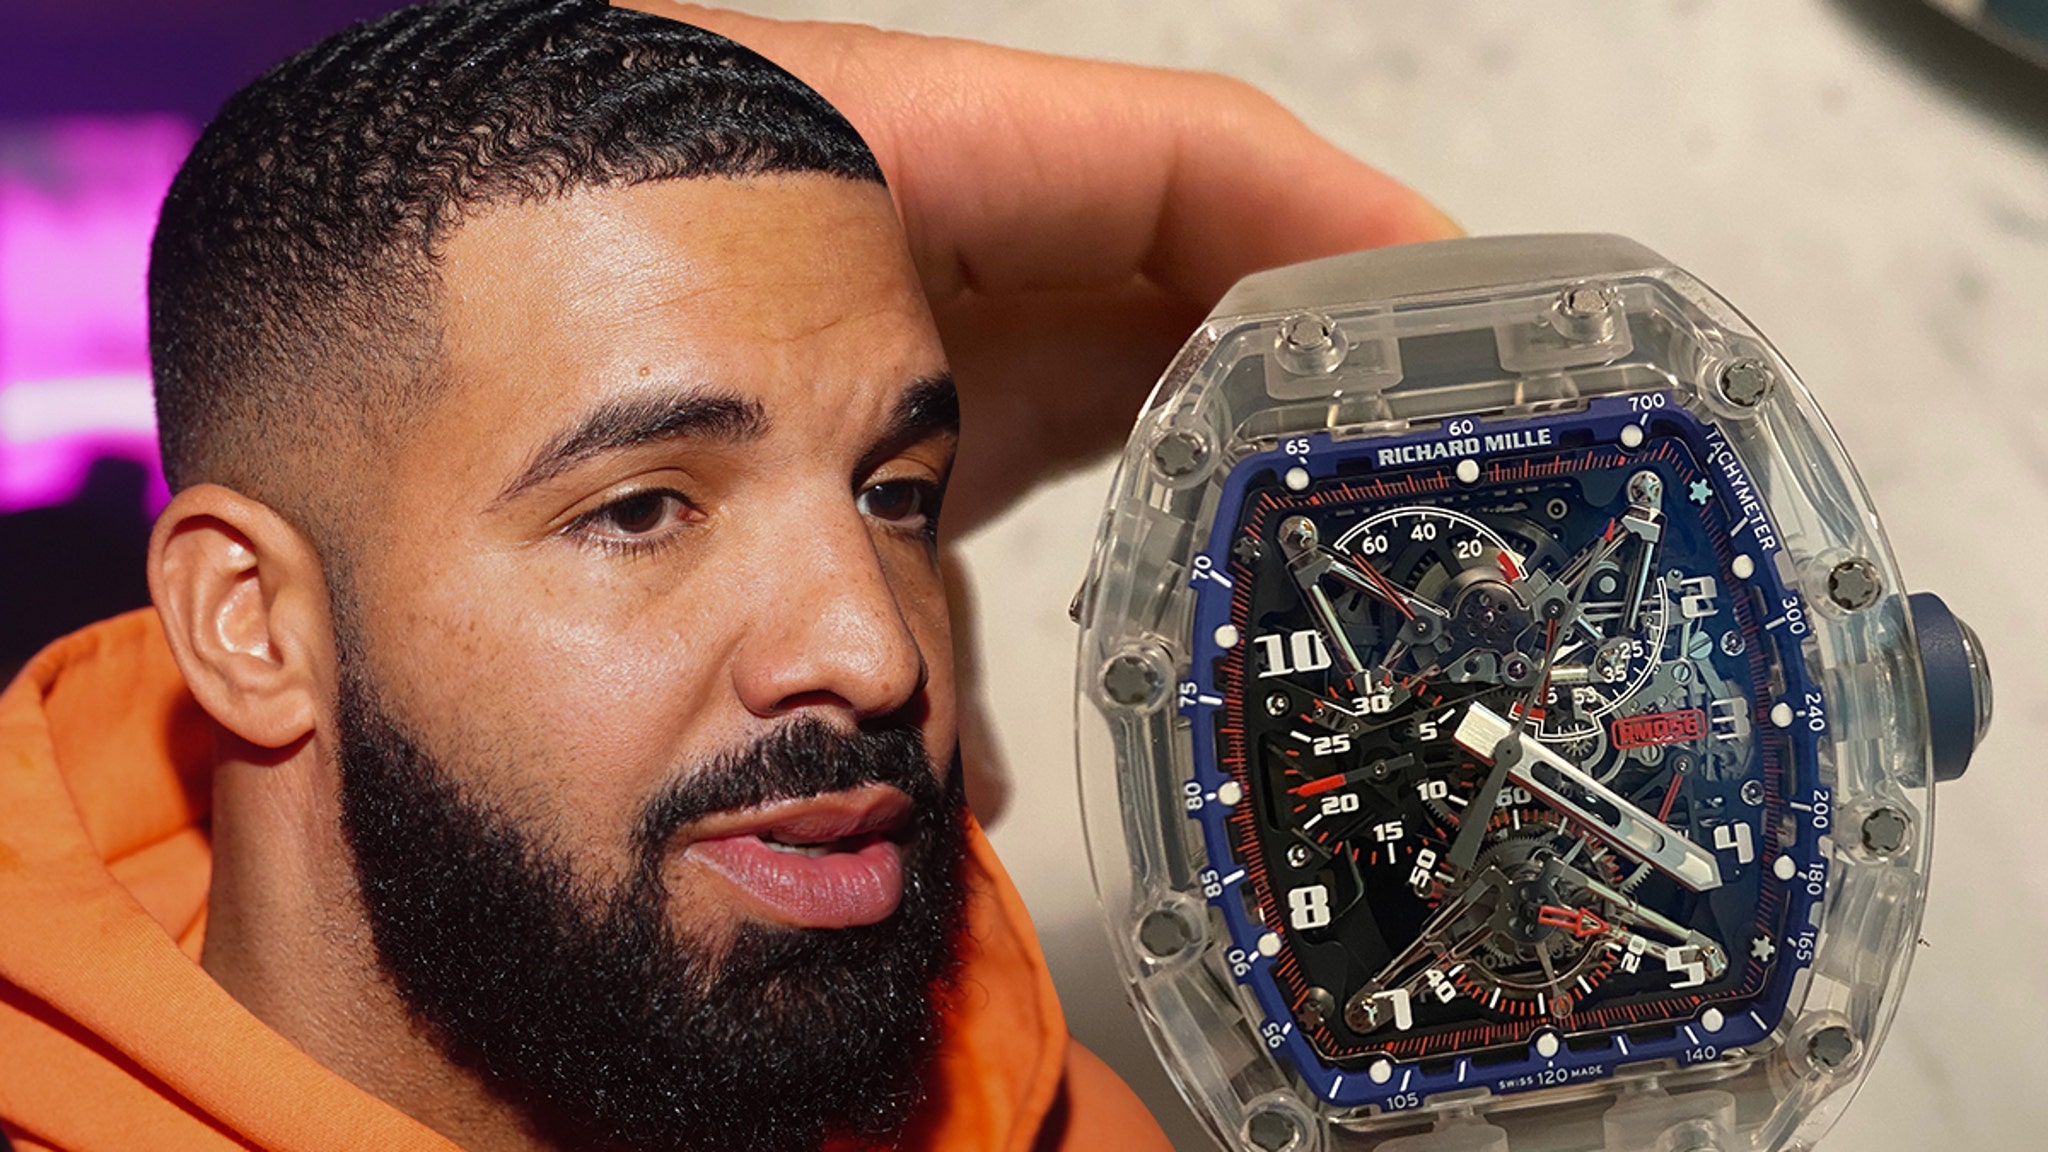 Drake's $5.5 MILLION Birthday Gift to Himself is One-of-a-Kind Watch